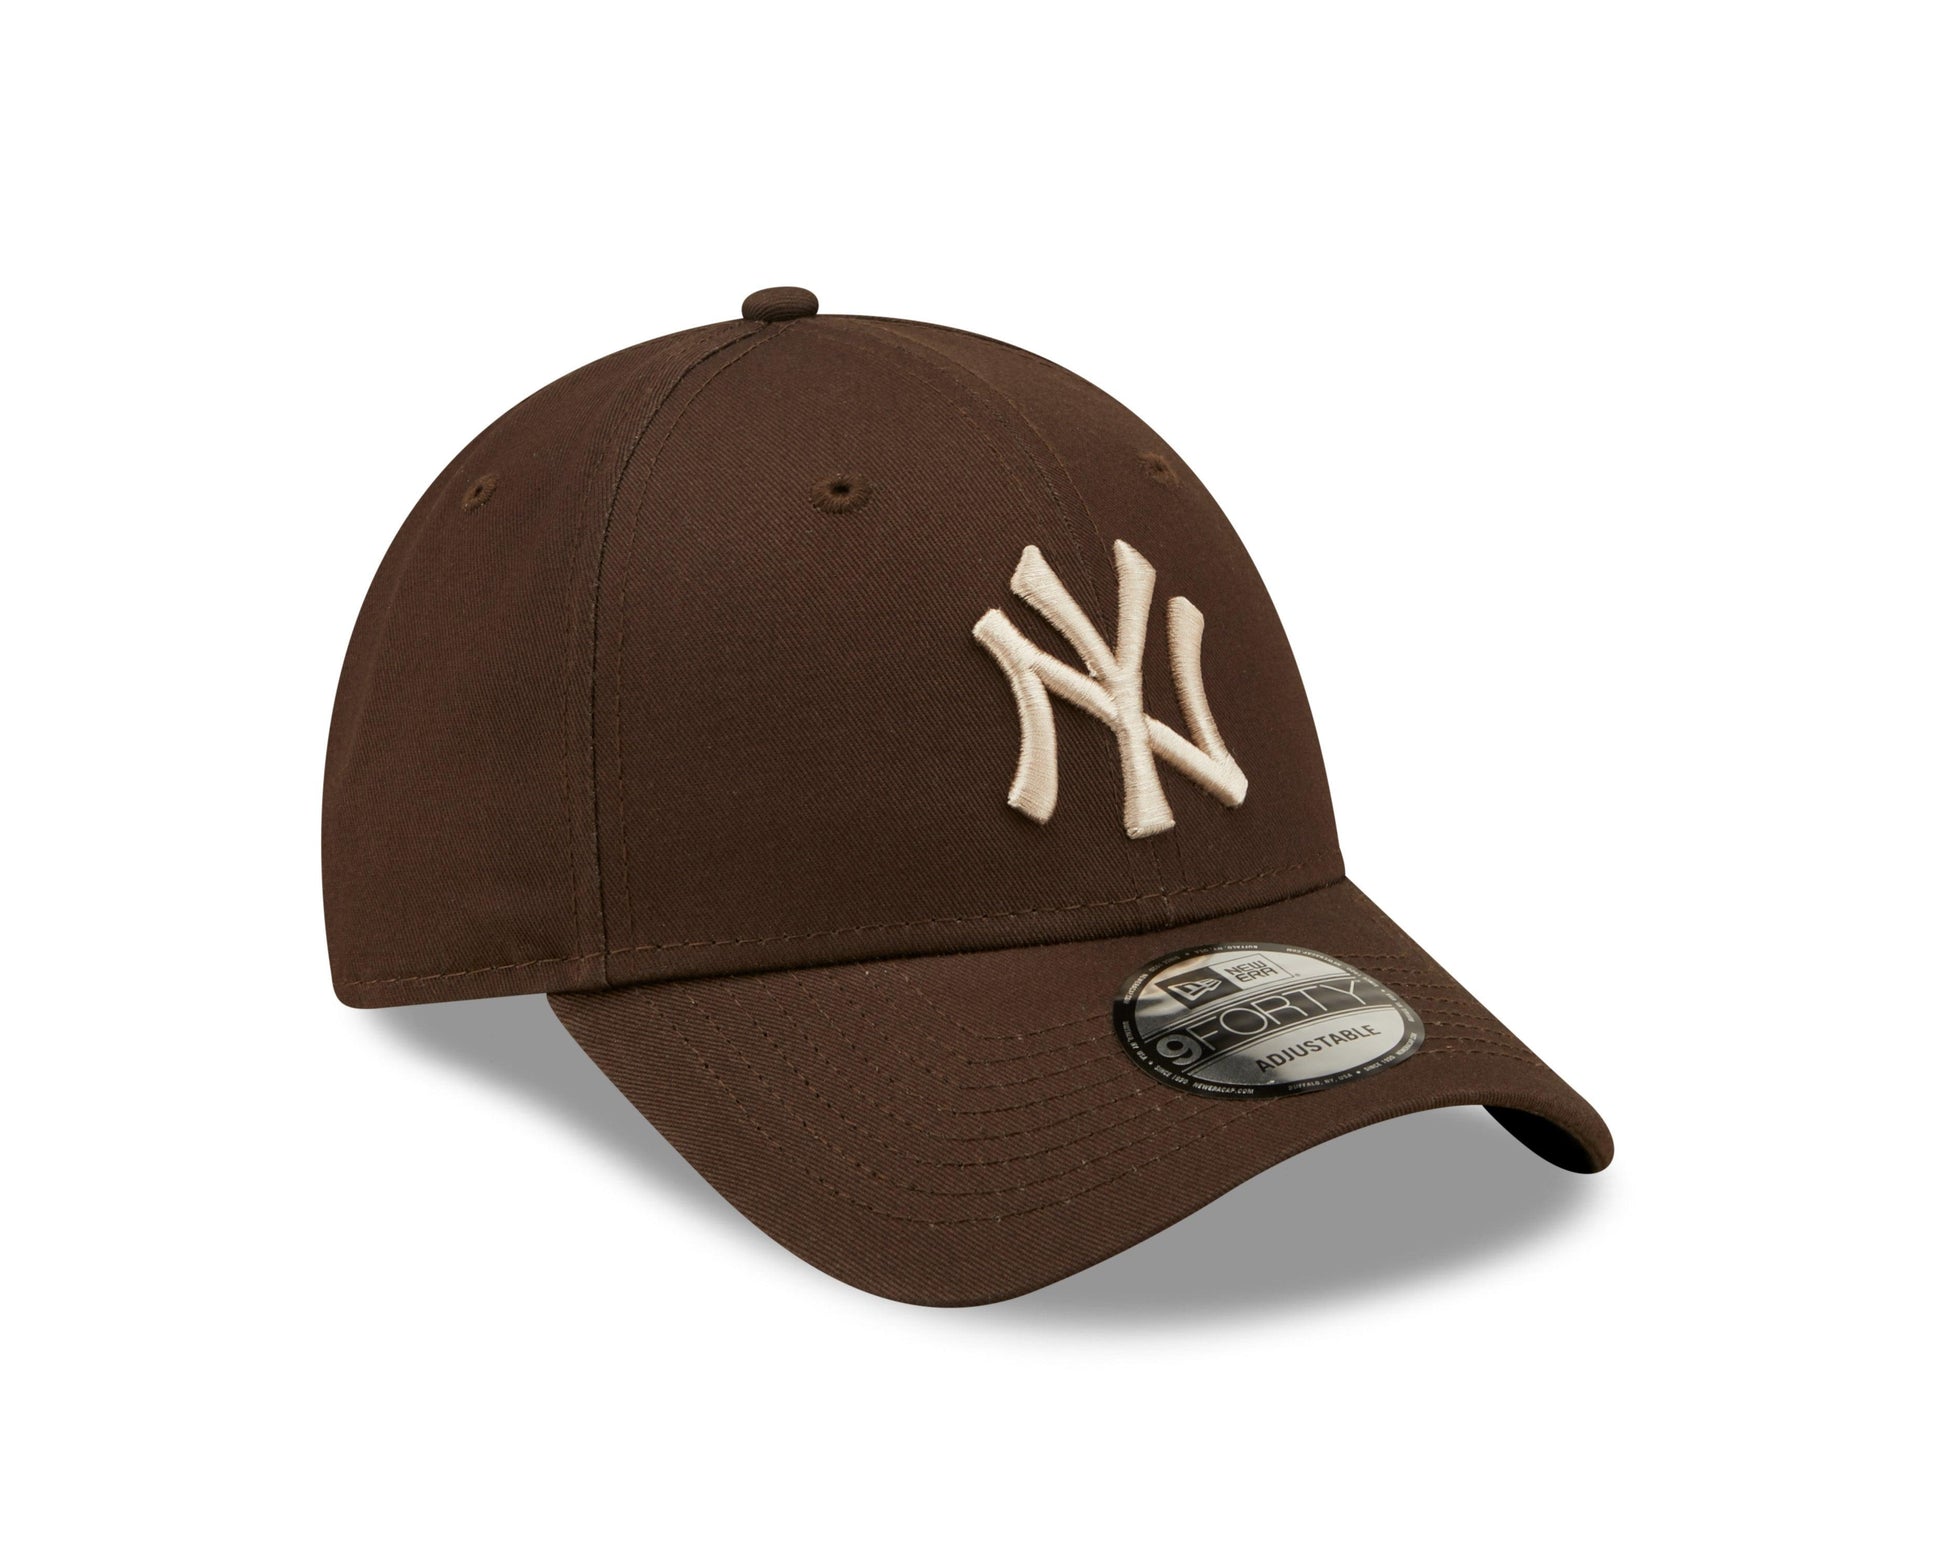 9Forty NY Yankees MLB Curved Cap by New Era